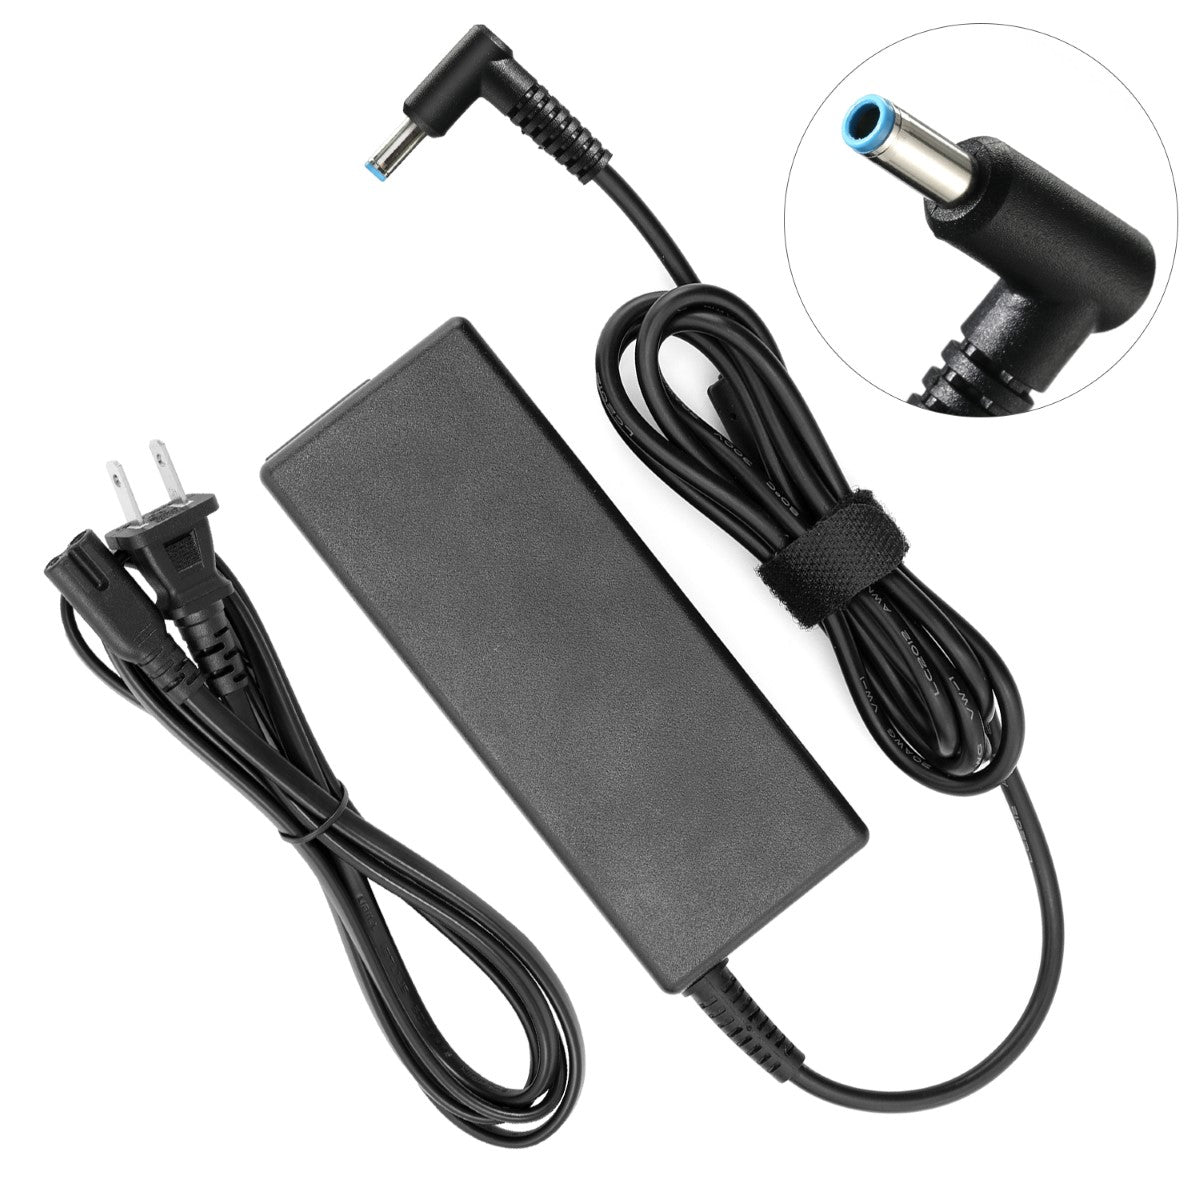 AC Adapter Charger for HP Pavilion 17-f236nr Laptop.